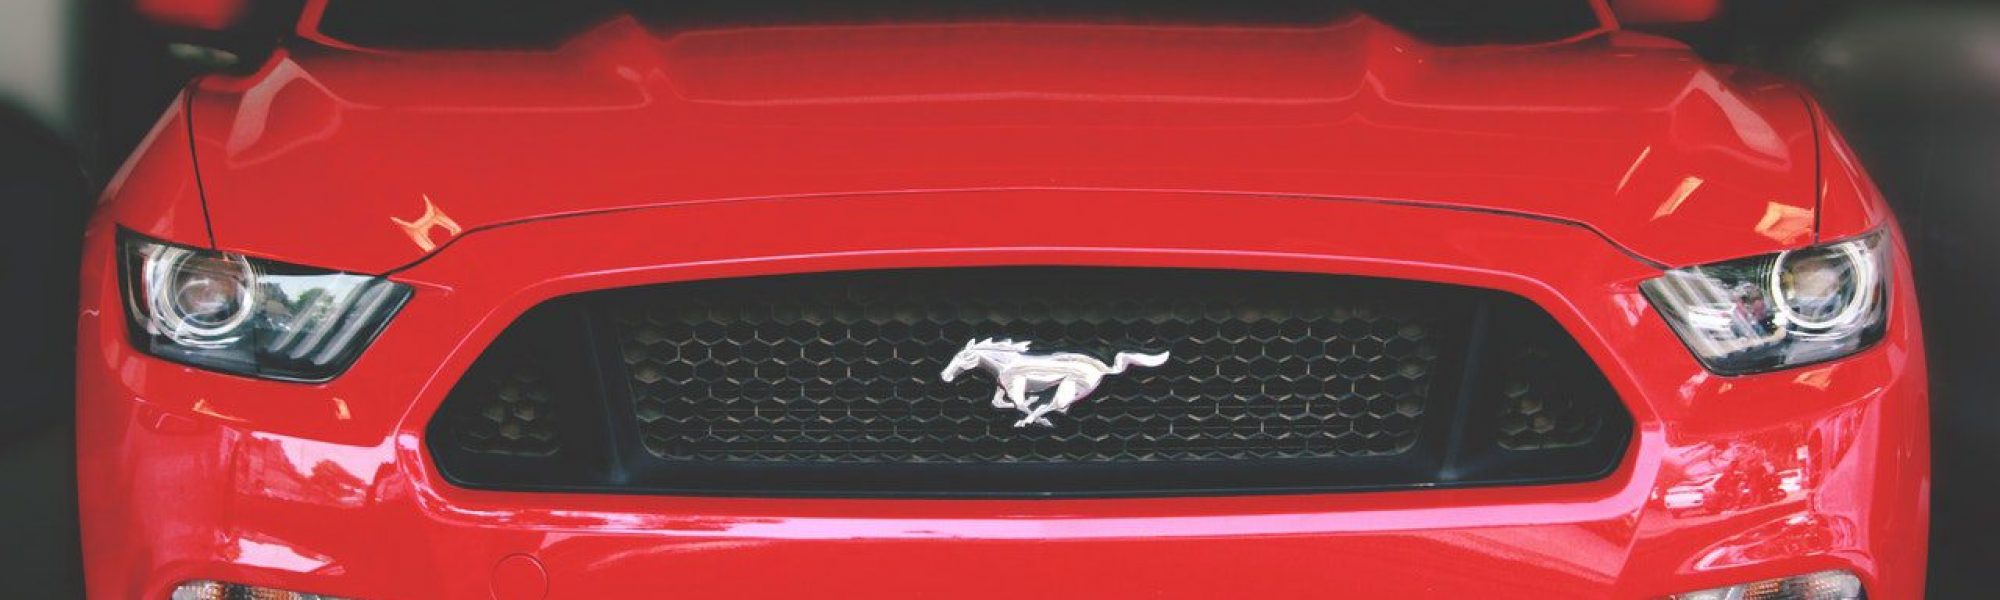 front view of red ford mustang